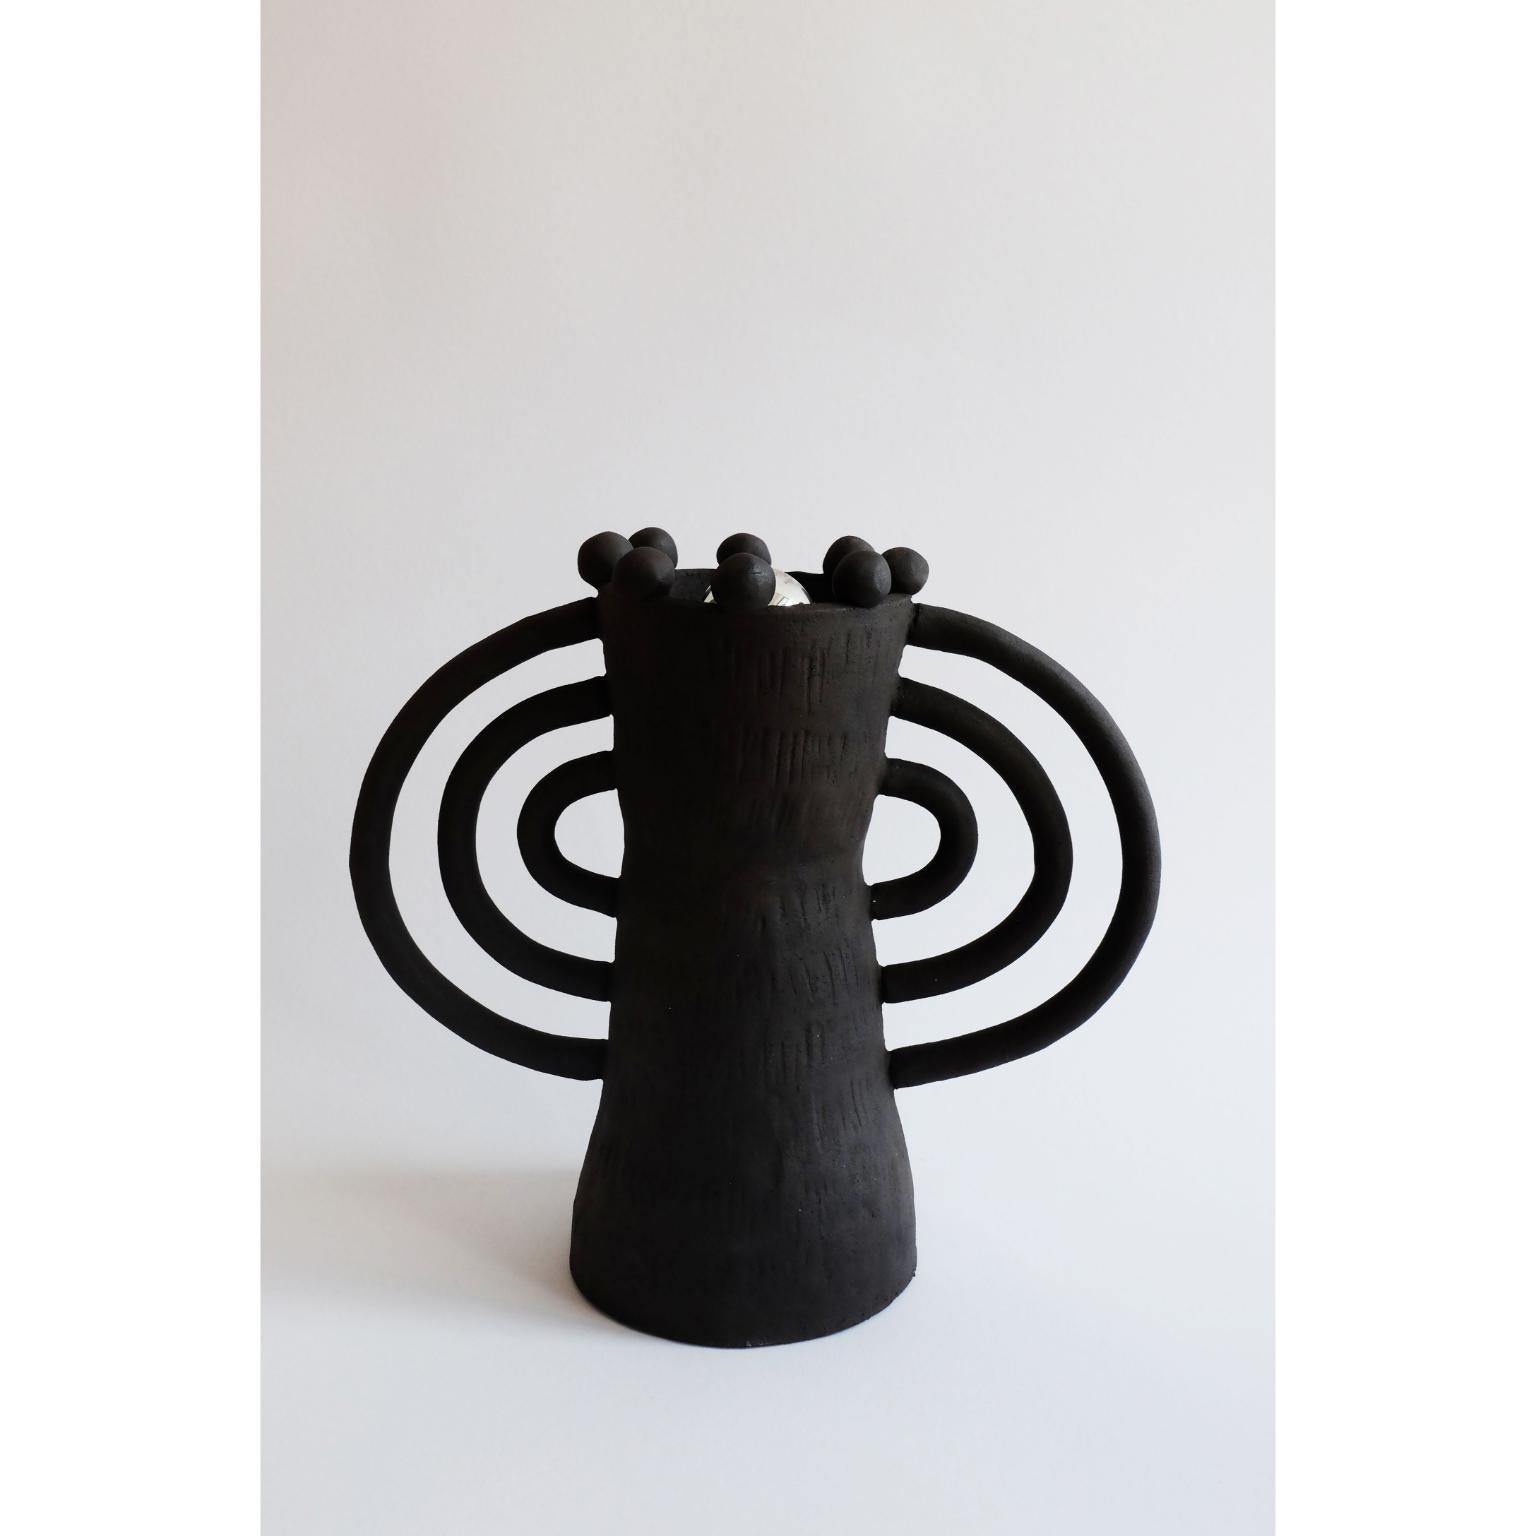 Handsculped Alcazar table lamp by Ia Kutateladze
Dimensions: W 32 x H 26 cm
Materials: Raw Black Clay

Alcazar lamp combines hand-built organic structure, with soft geometric elements and shapes, an object full of character.

IAAI / Ia